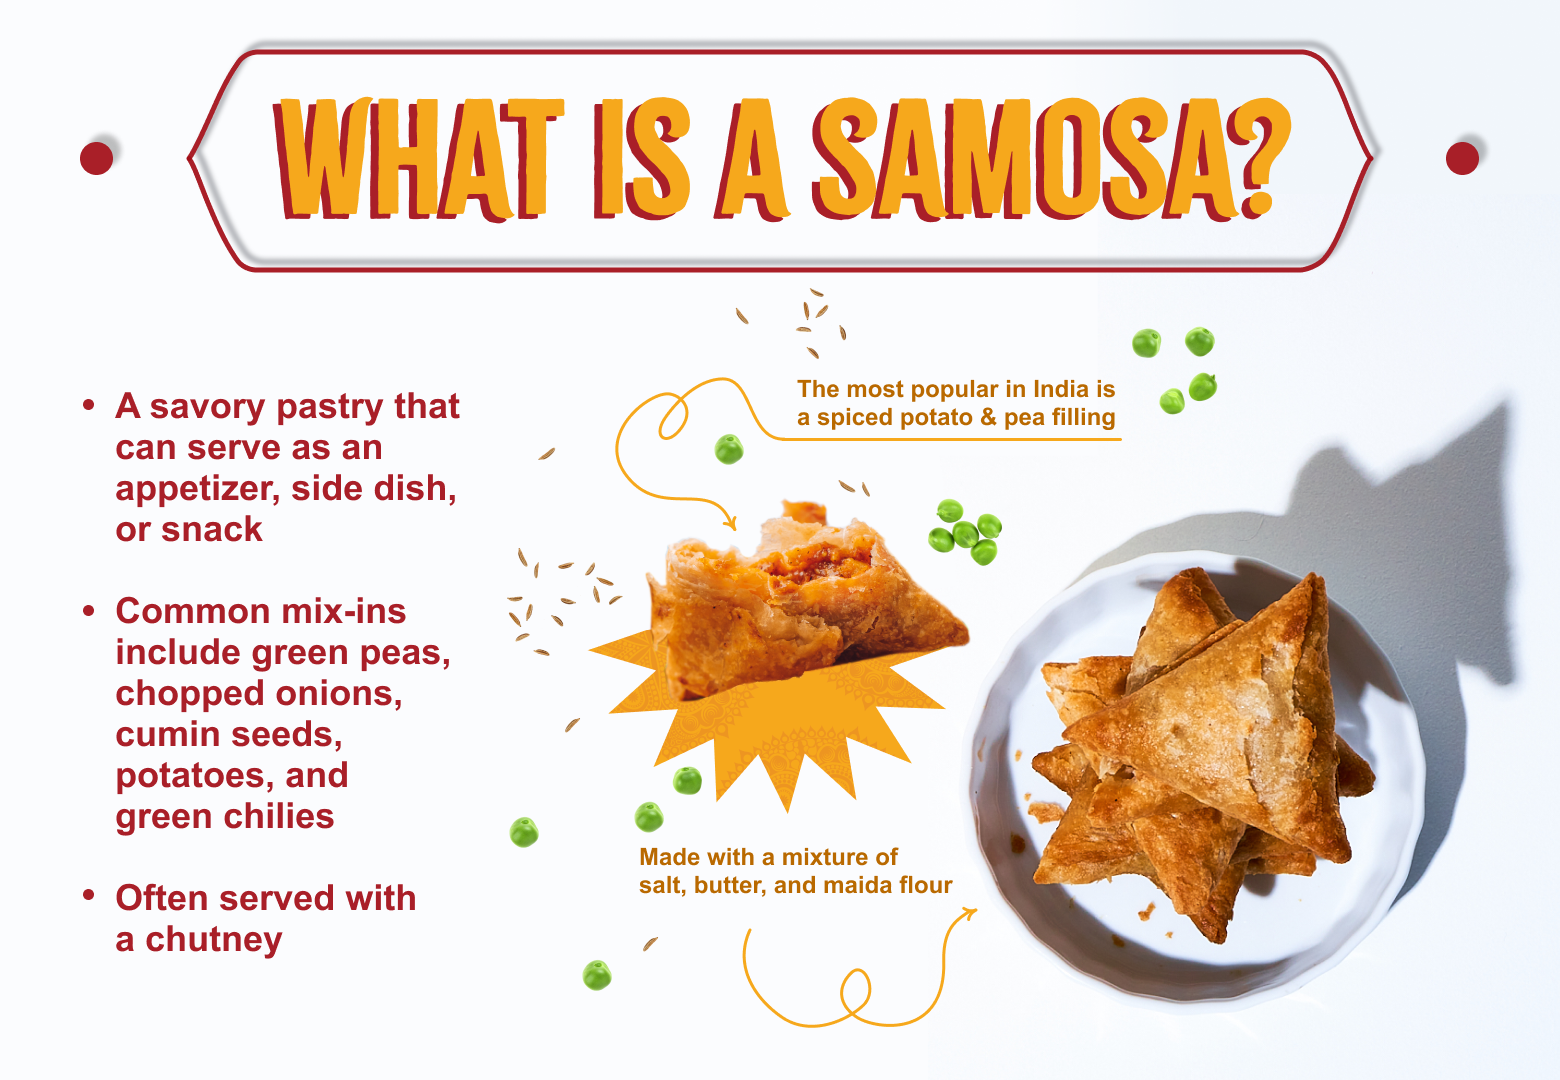 What is a samosa by Sukhi's